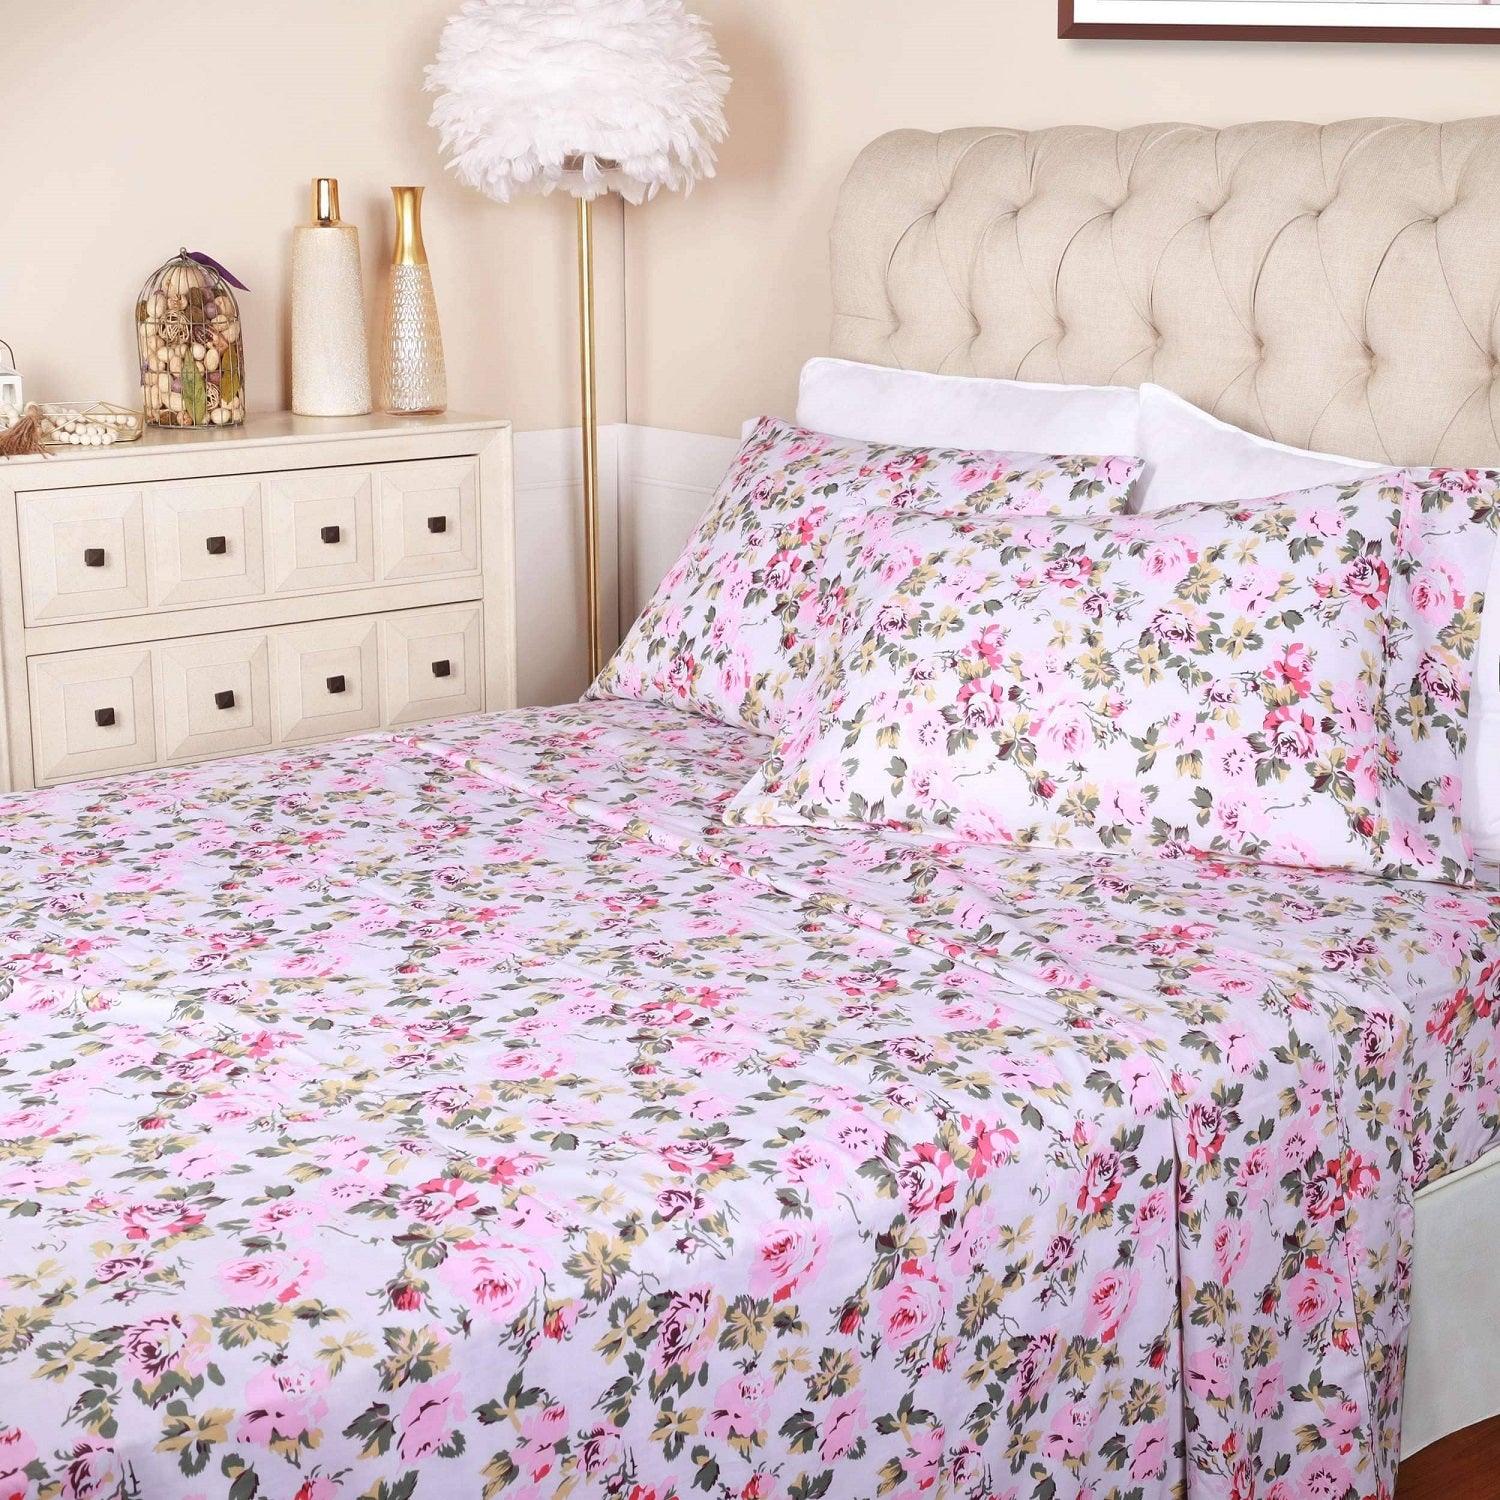 How do you keep your bedsheets from wrinkling? - Home City Inc